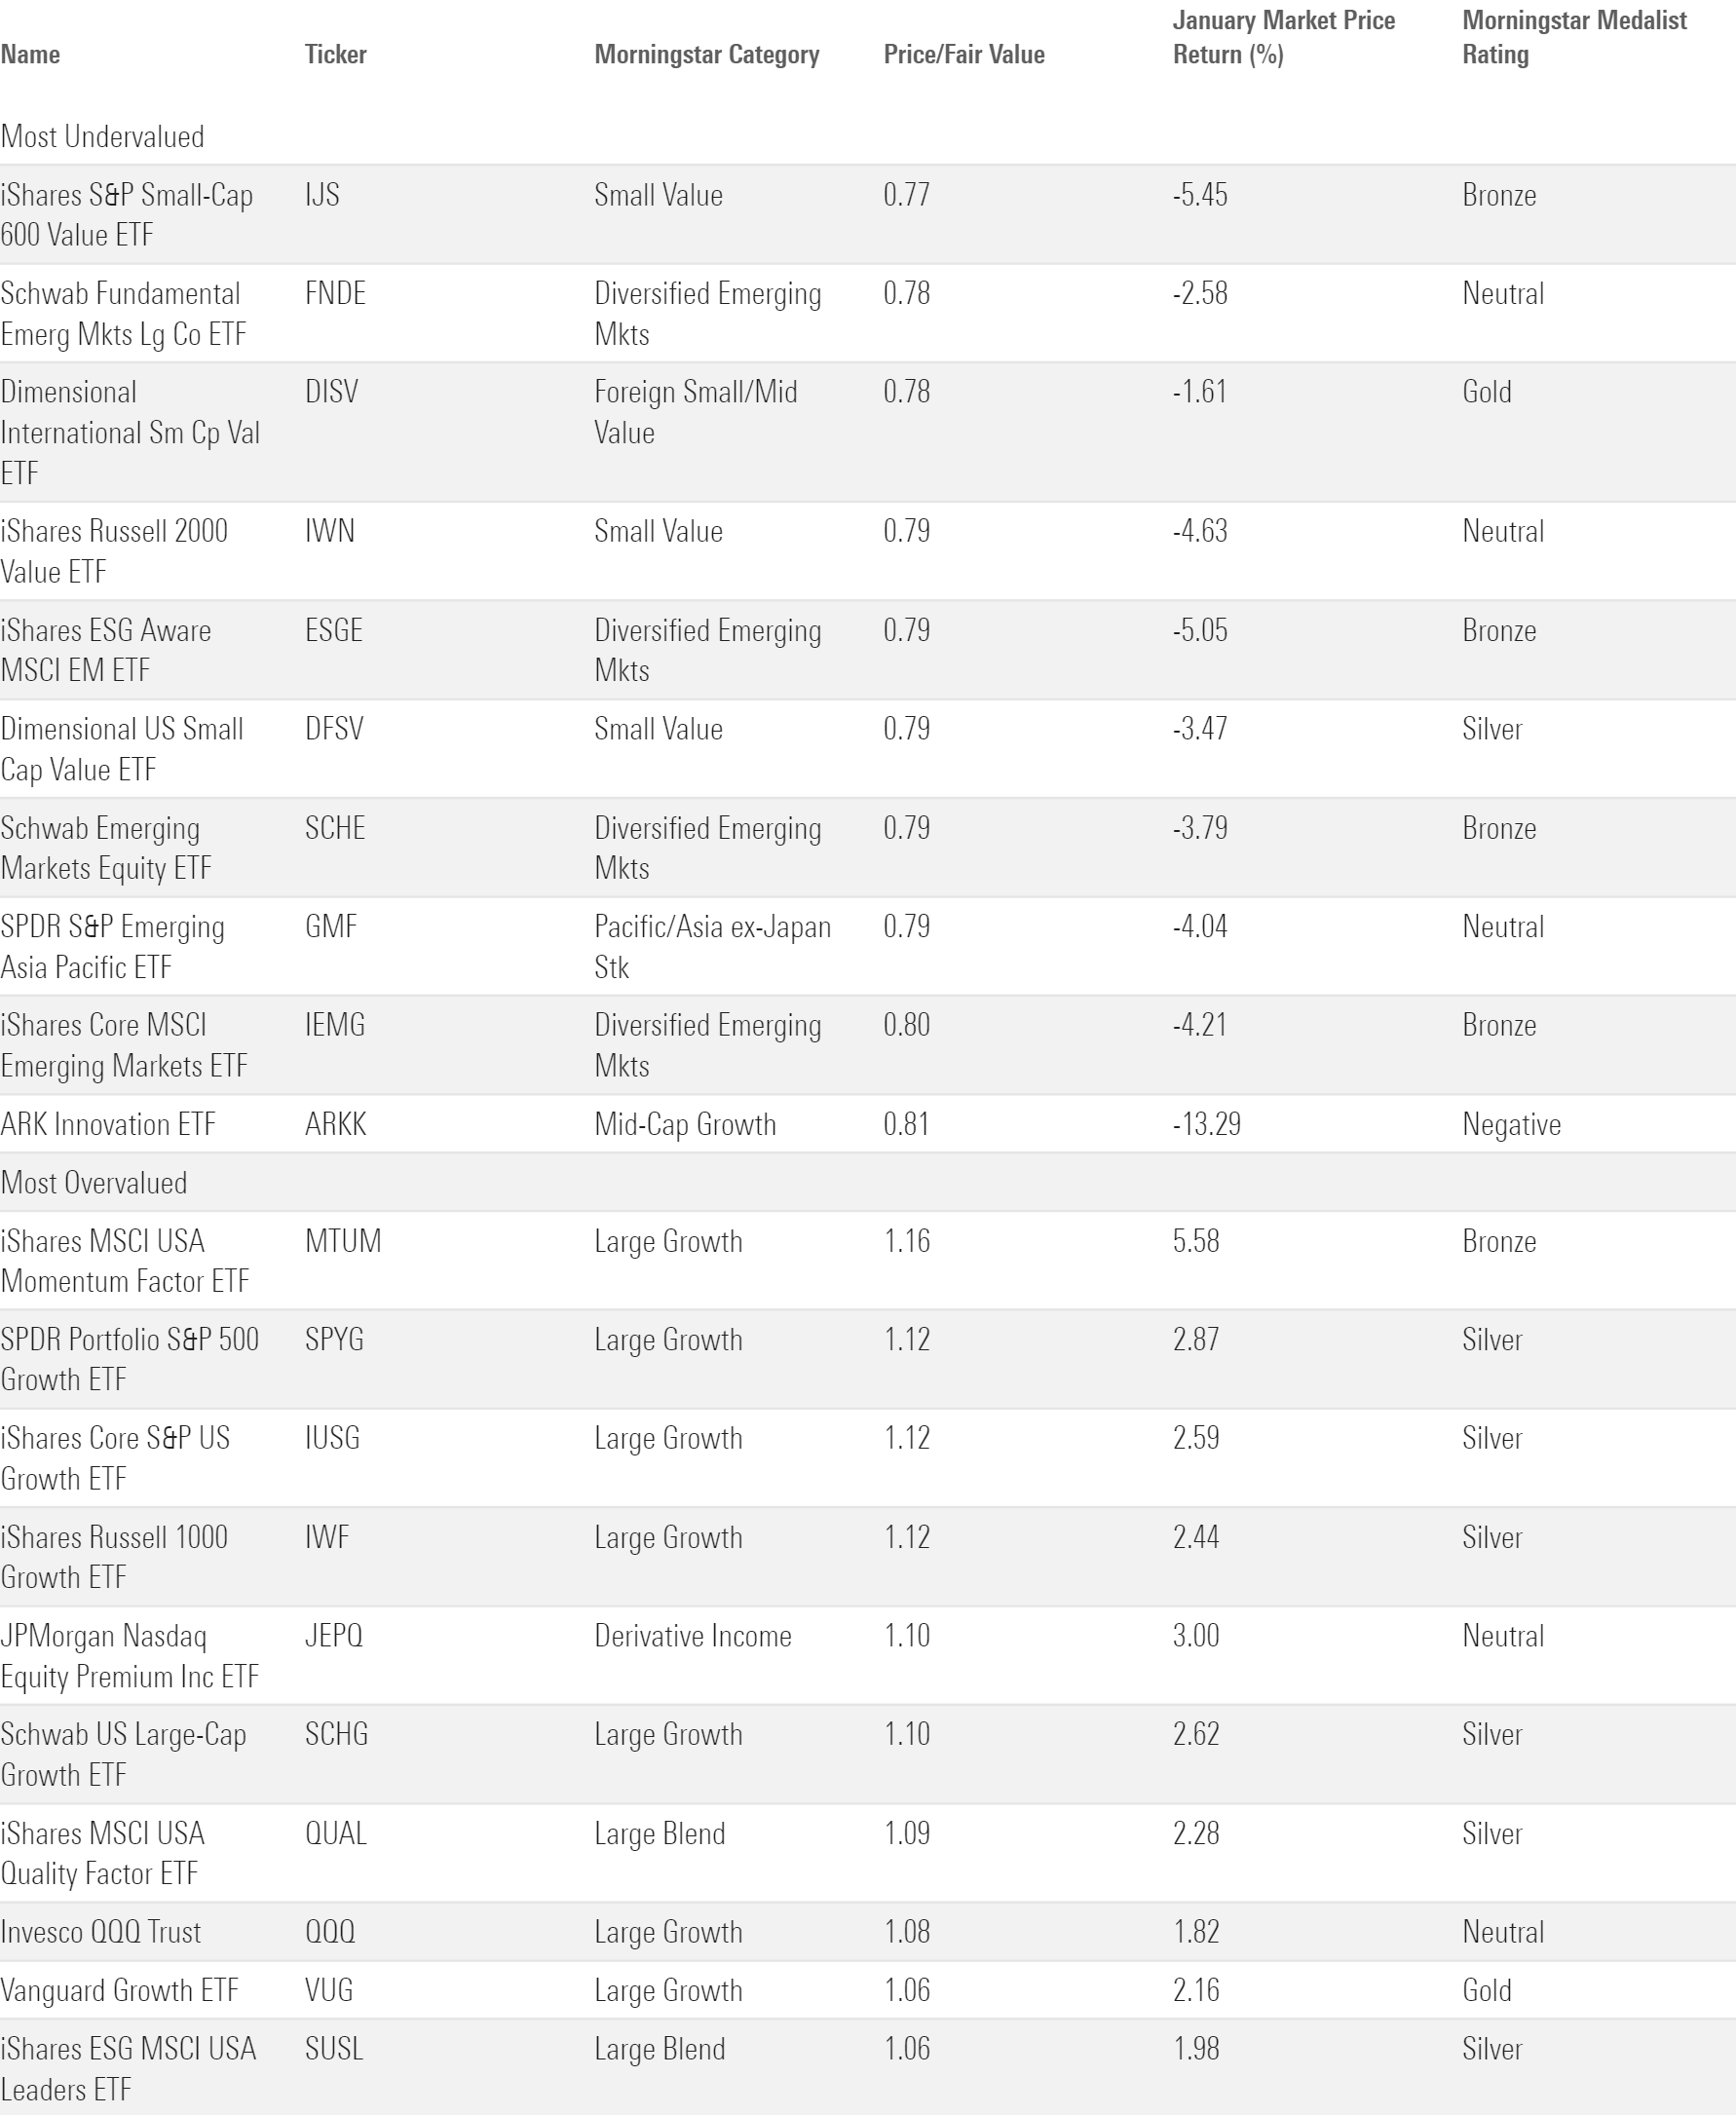 A table that shows the 10 most under- and overvalued analyst-rated ETFs according to Morningstar's price/fair value metric.